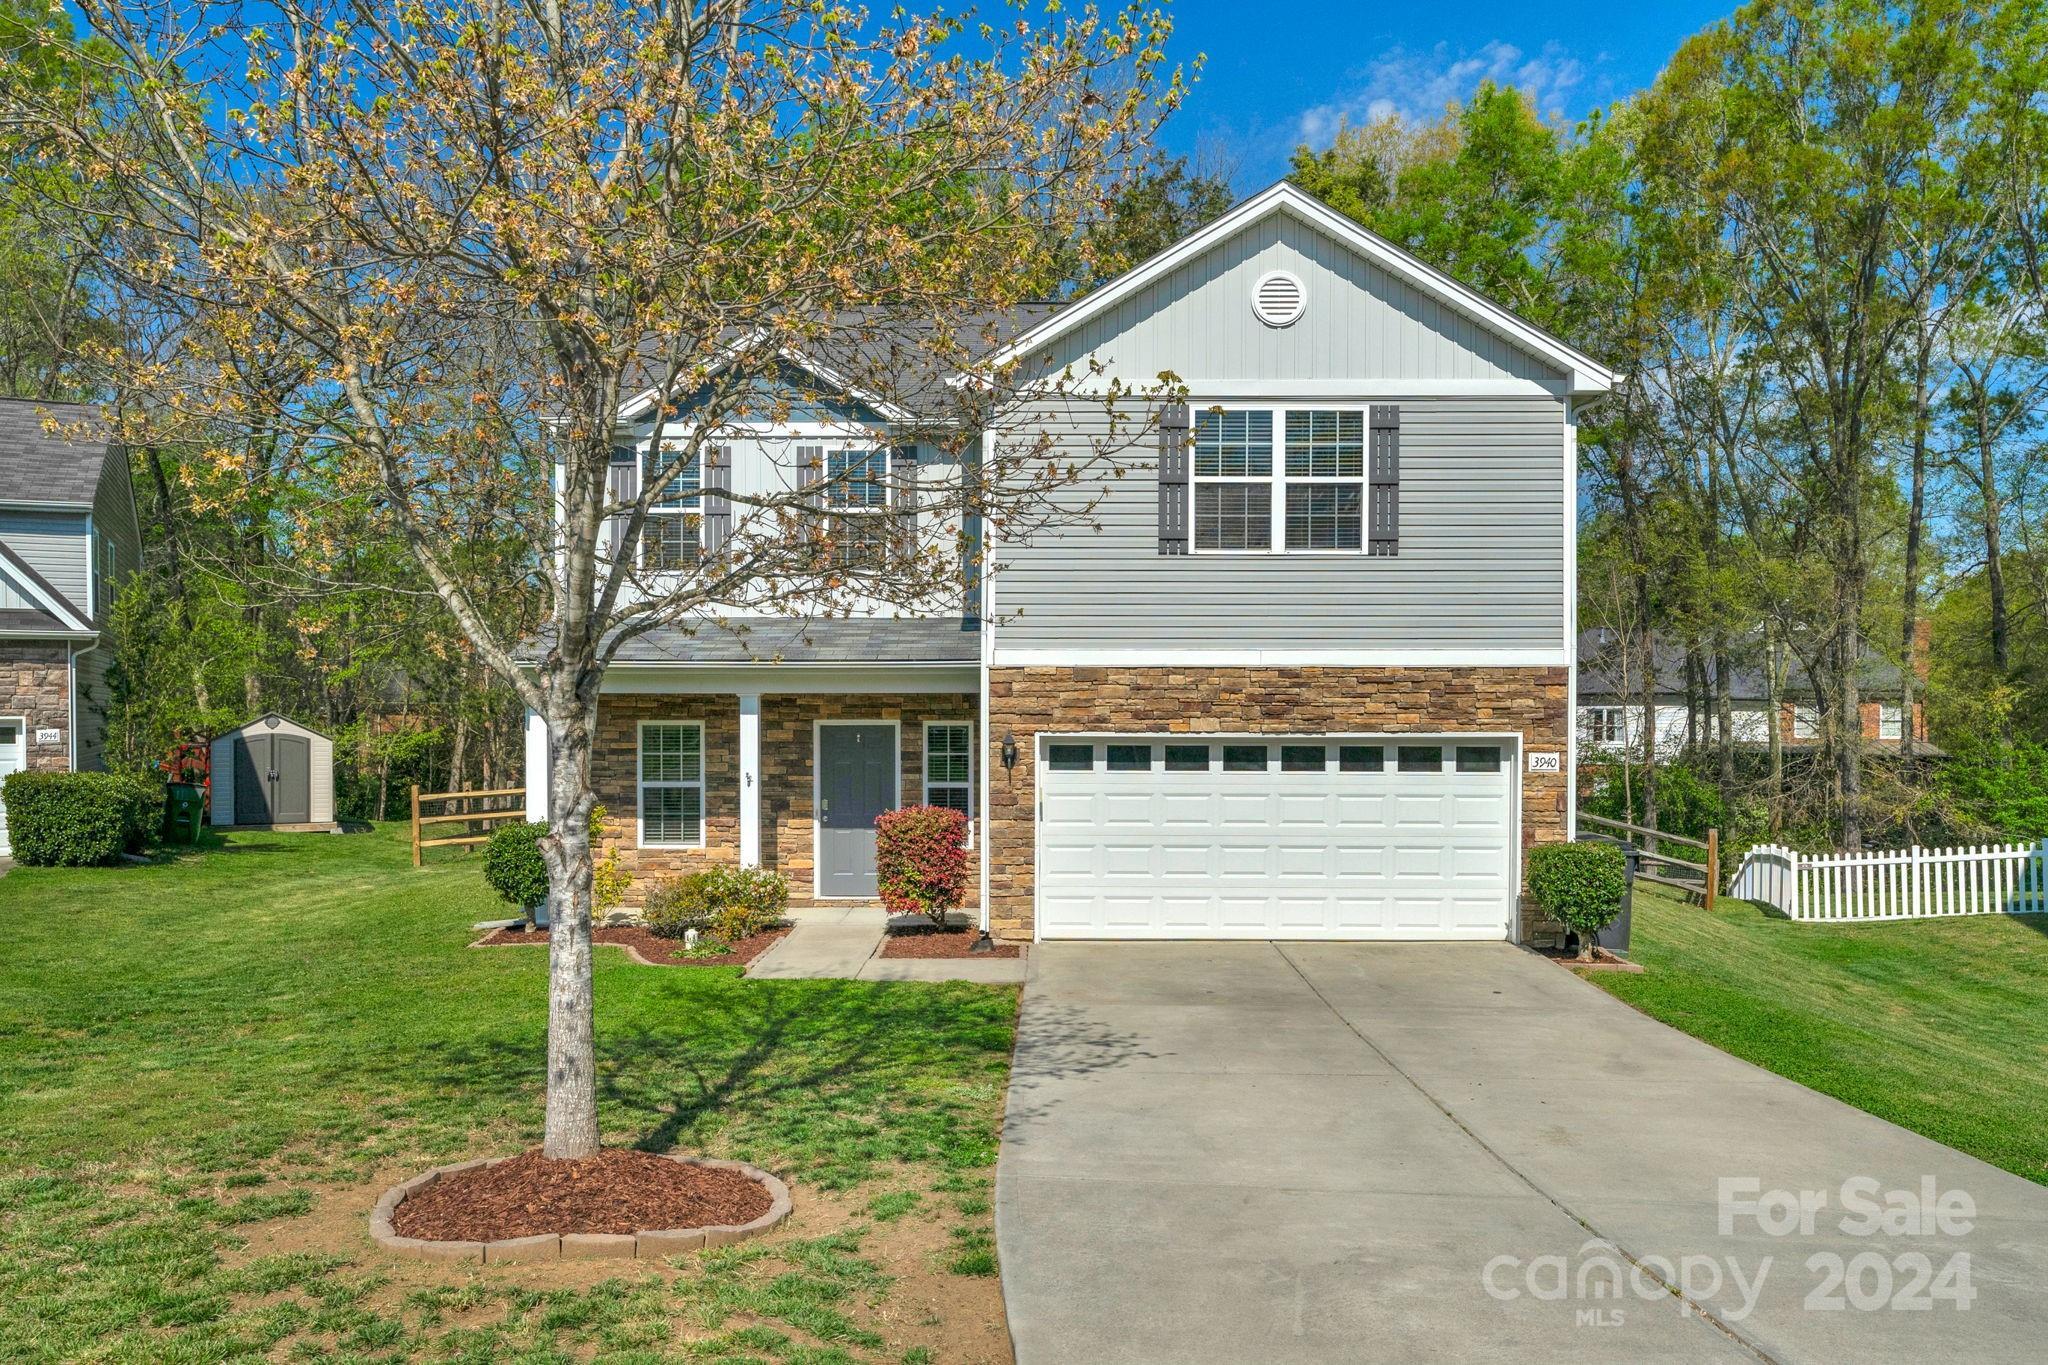 Photo one of 3940 Sky Dr Charlotte NC 28226 | MLS 4125662